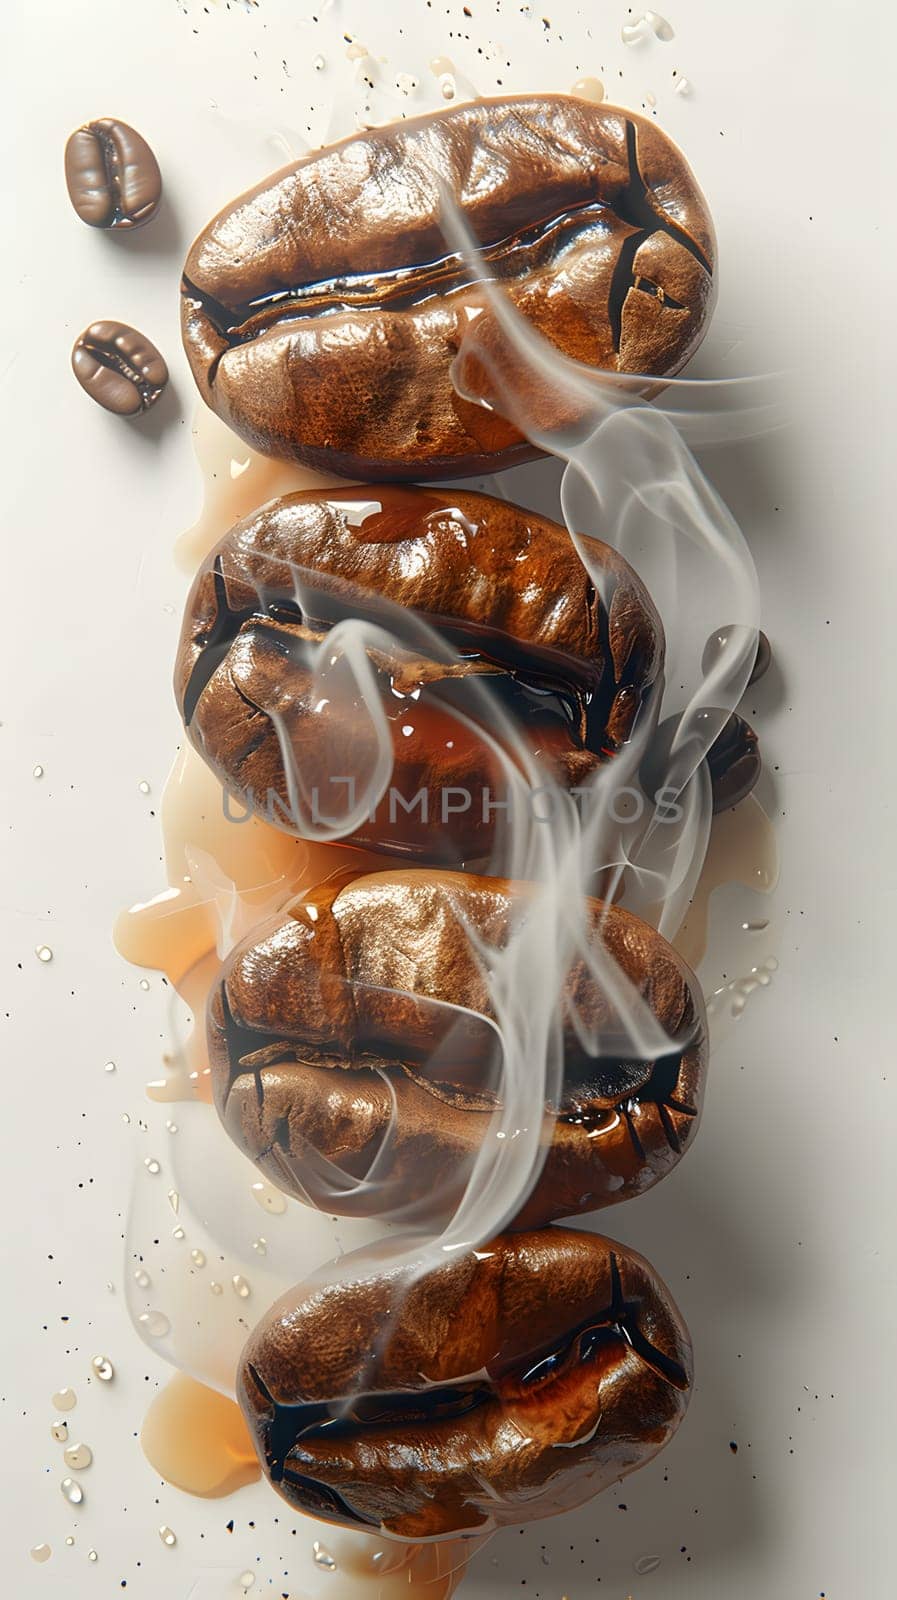 A stack of coffee beans is surrounded by smoke, giving the appearance of a swarm of insect pests. The swirling pattern resembles the wings of membranewinged insects in macro photography